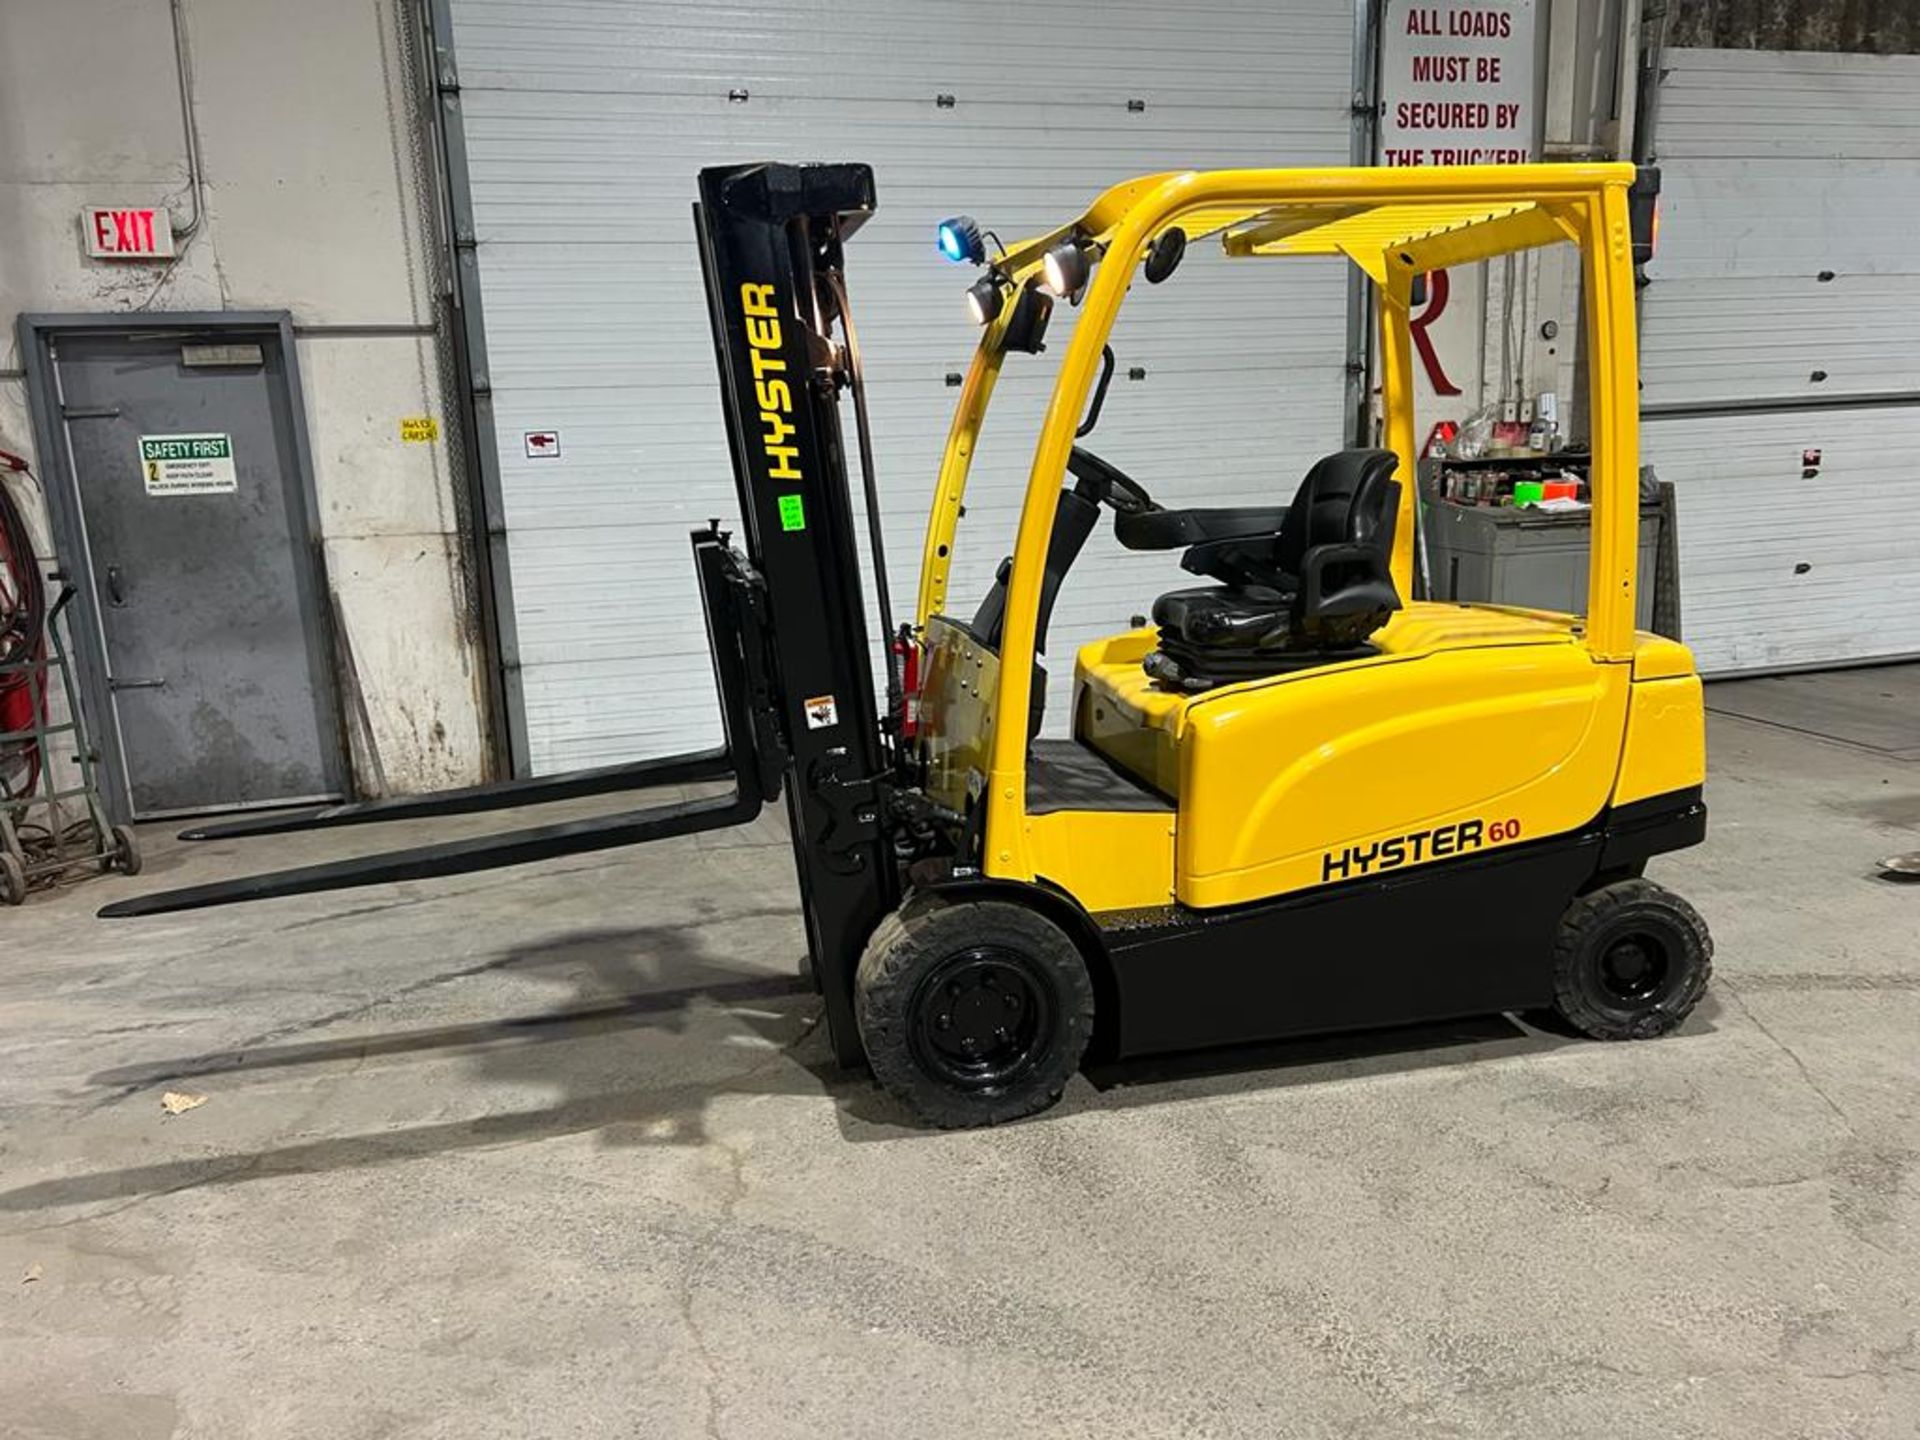 NICE 2016 Hyster model 60 - 6,000lbs Capacity OUTDOOR Forklift Electric with Sideshift 54" forks,